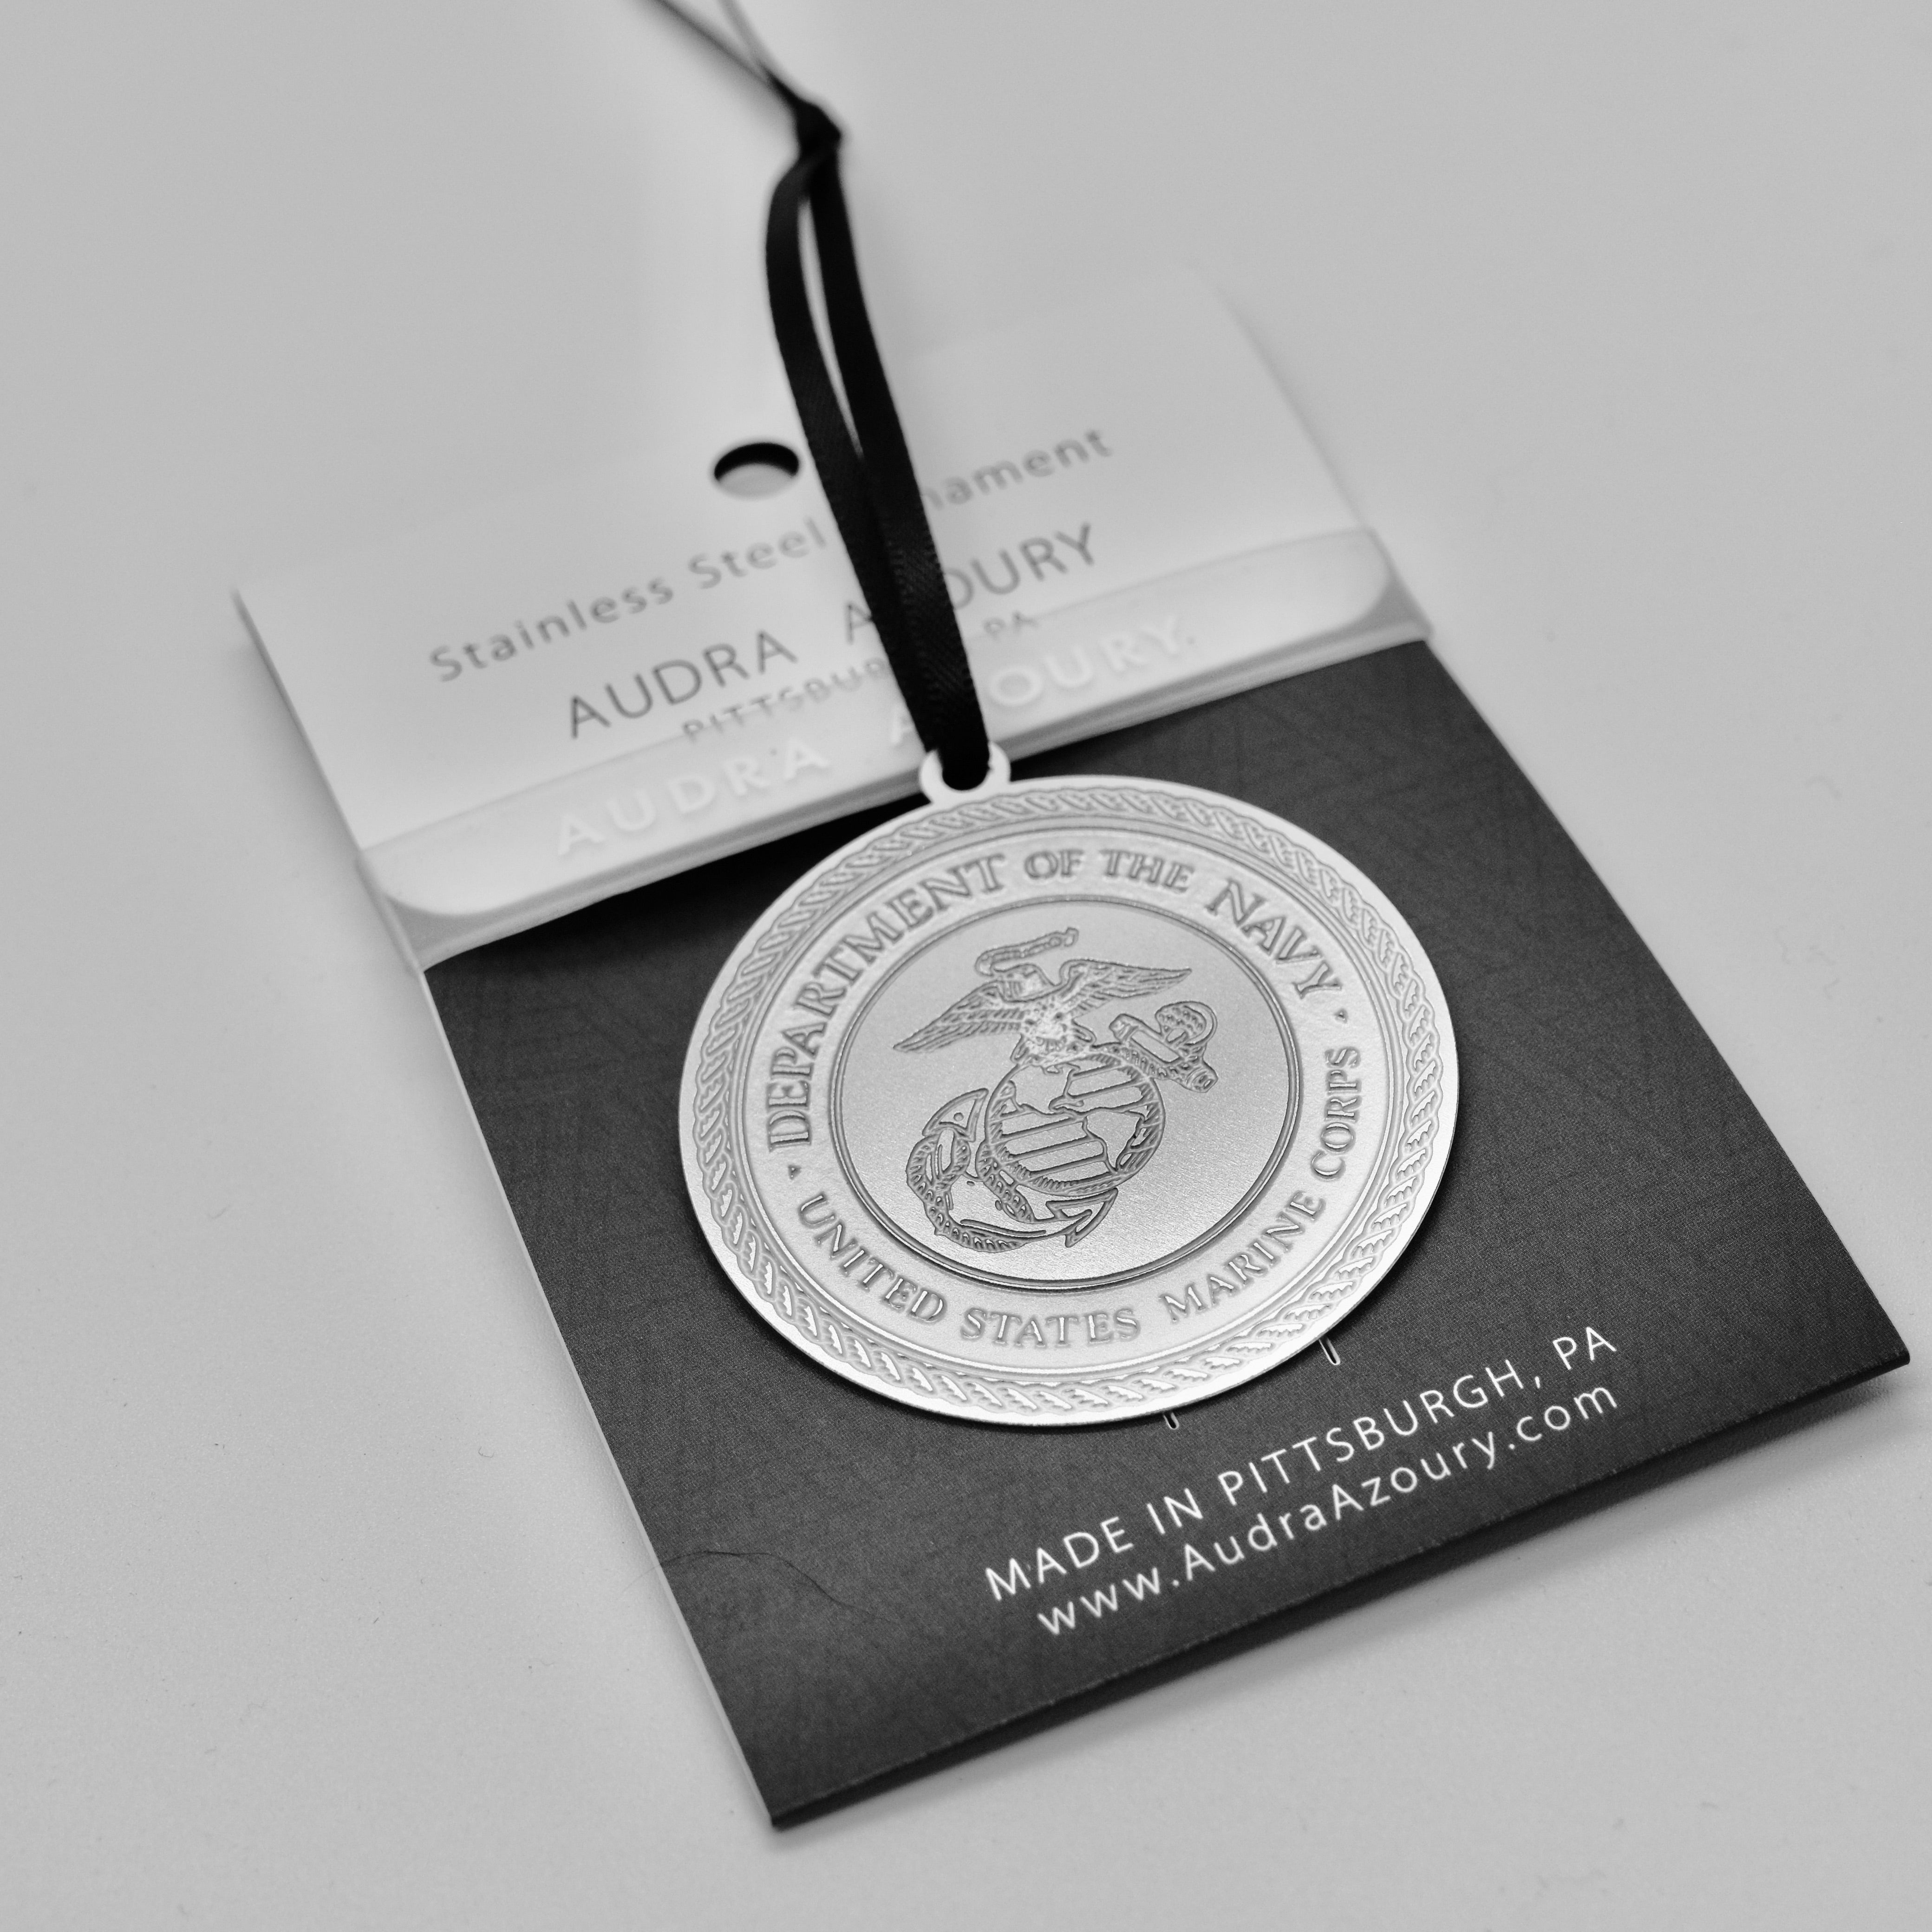 Marines Corp. Seal Ornament